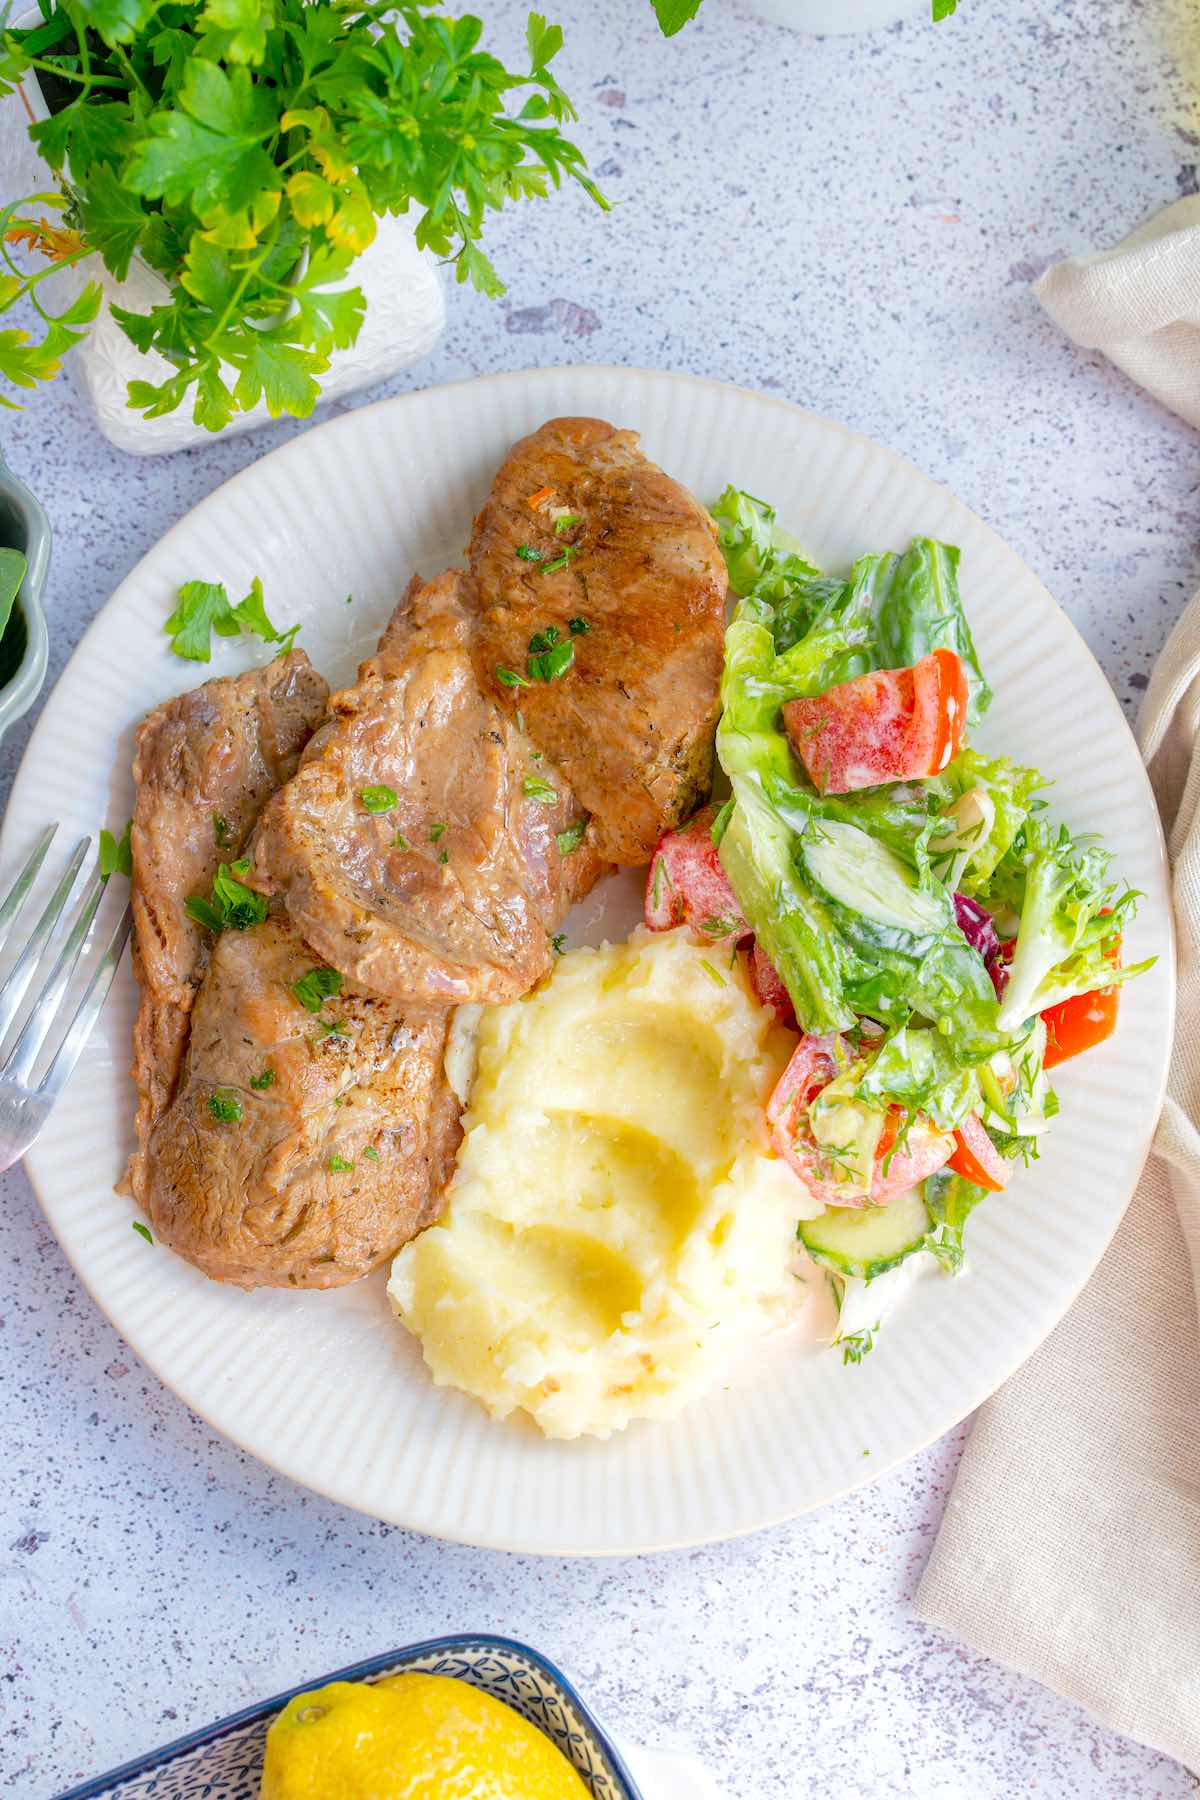 instant pot pork chops with mashed potatoes and salad.